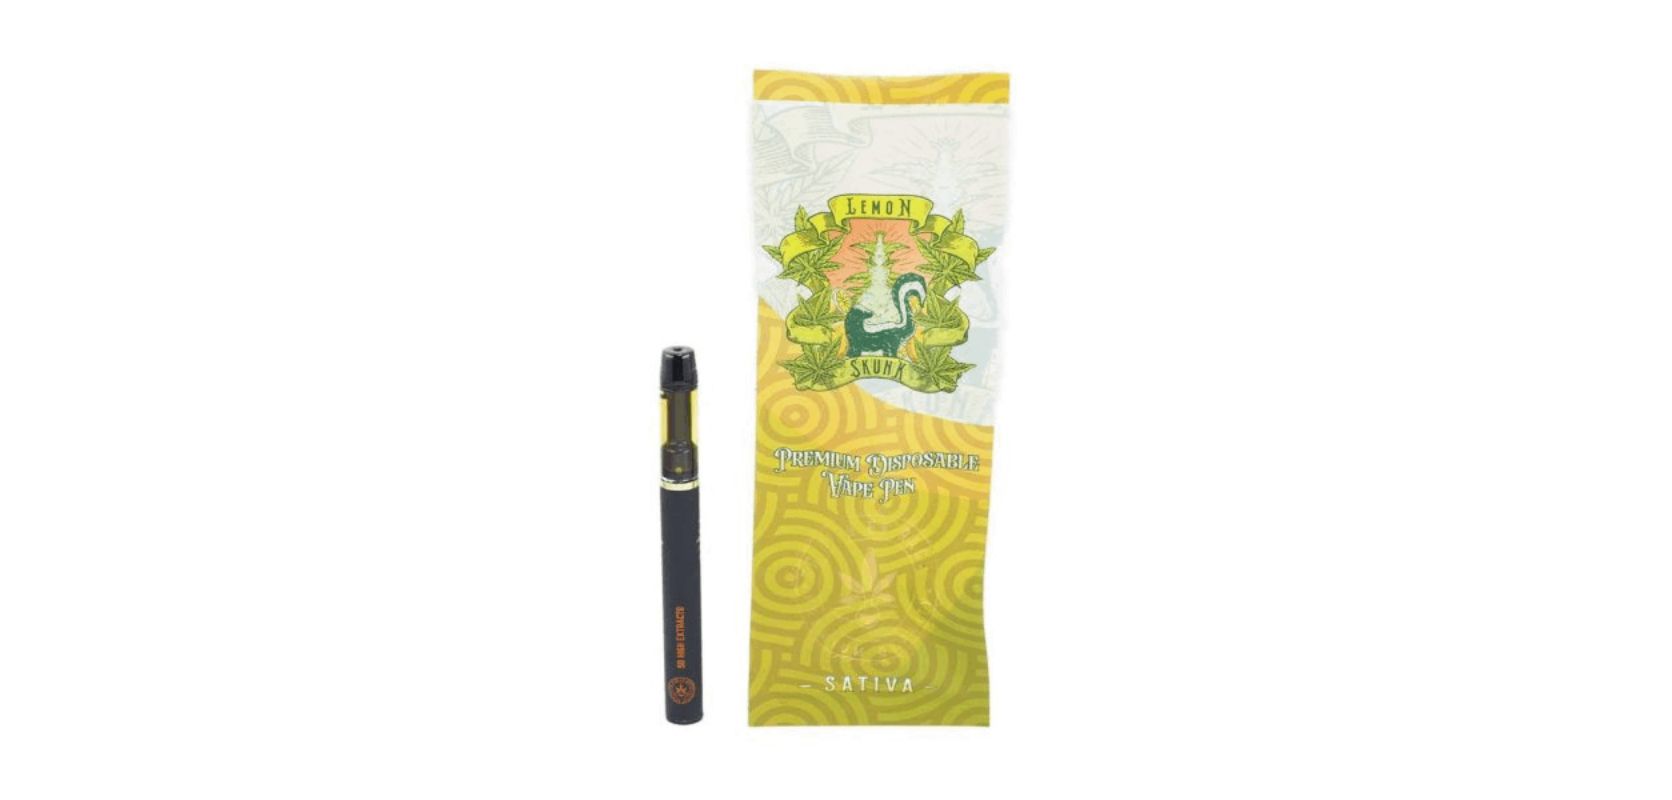 Looking for a THC vape pen that's perfect for creative blocks and lack of focus? If so, the So High Extracts Disposable Pen in Lemon Skunk 1ml (Sativa) may be the best solution for you.